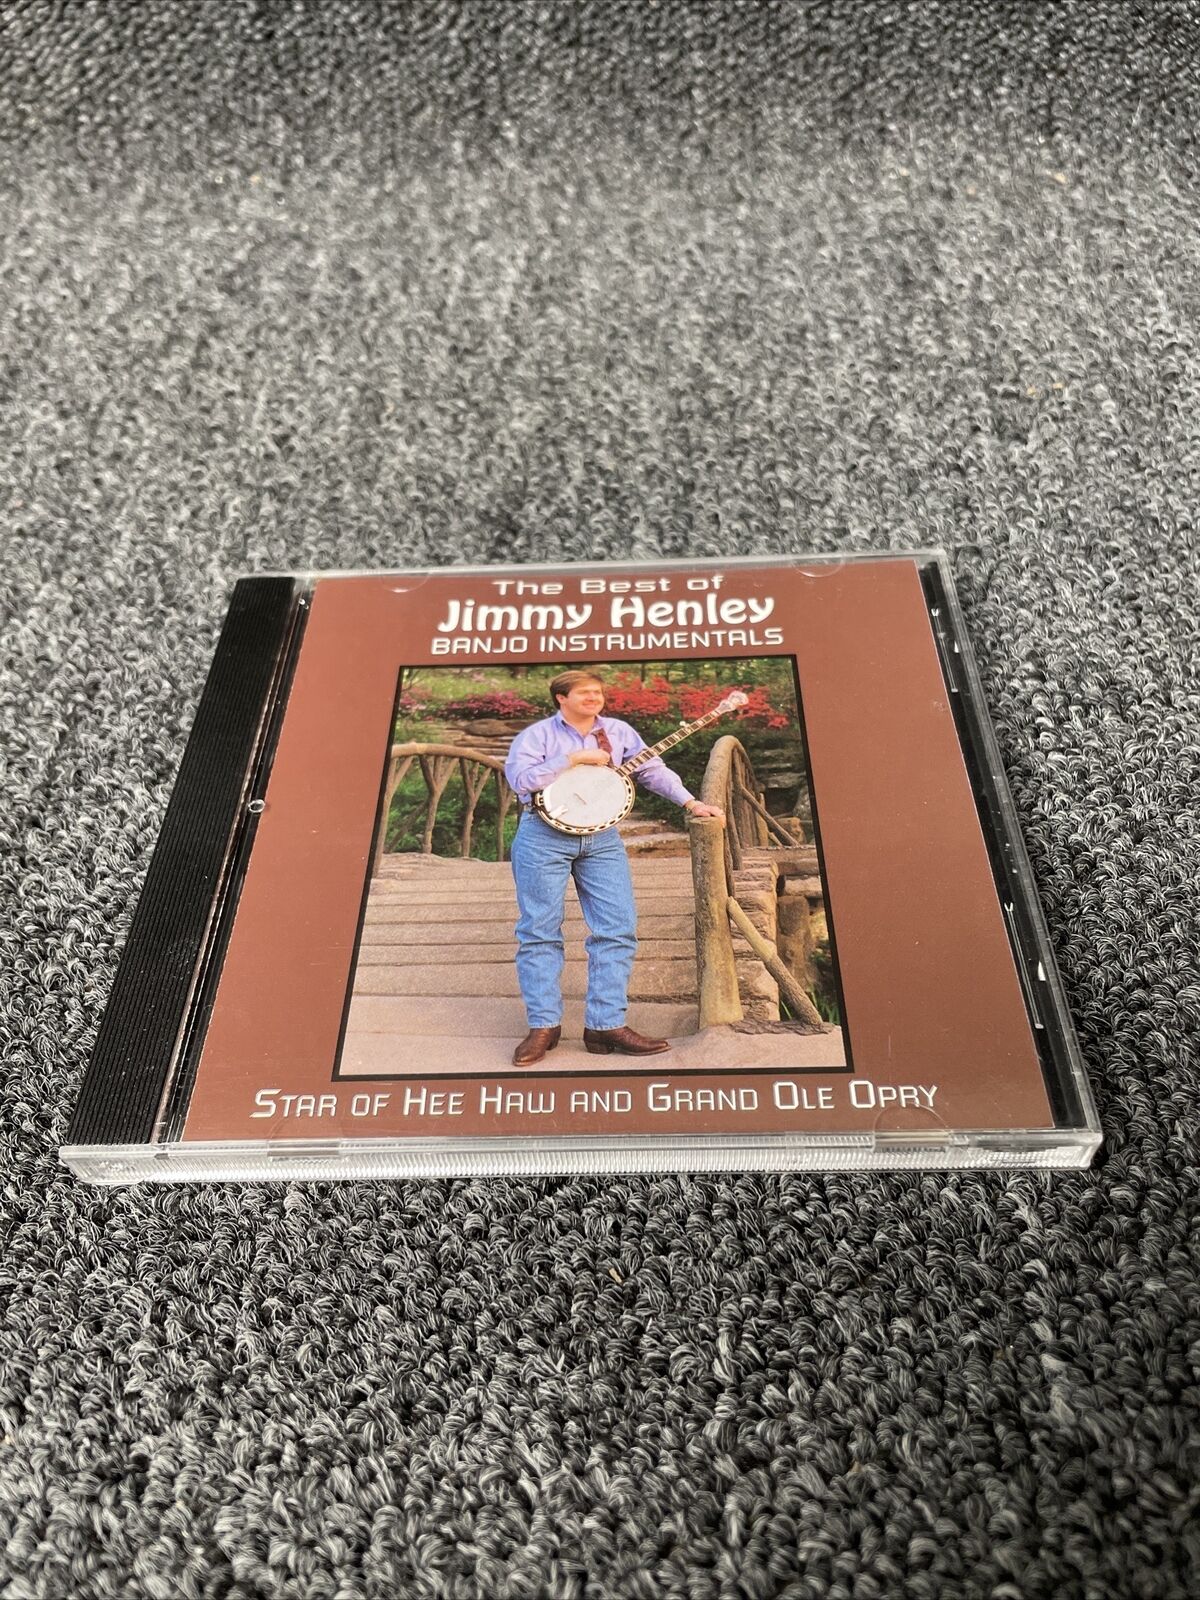 The Best Of Jimmy Henley Banjo Instrumentals Star Hee Haw Grand Ole Opry Signed